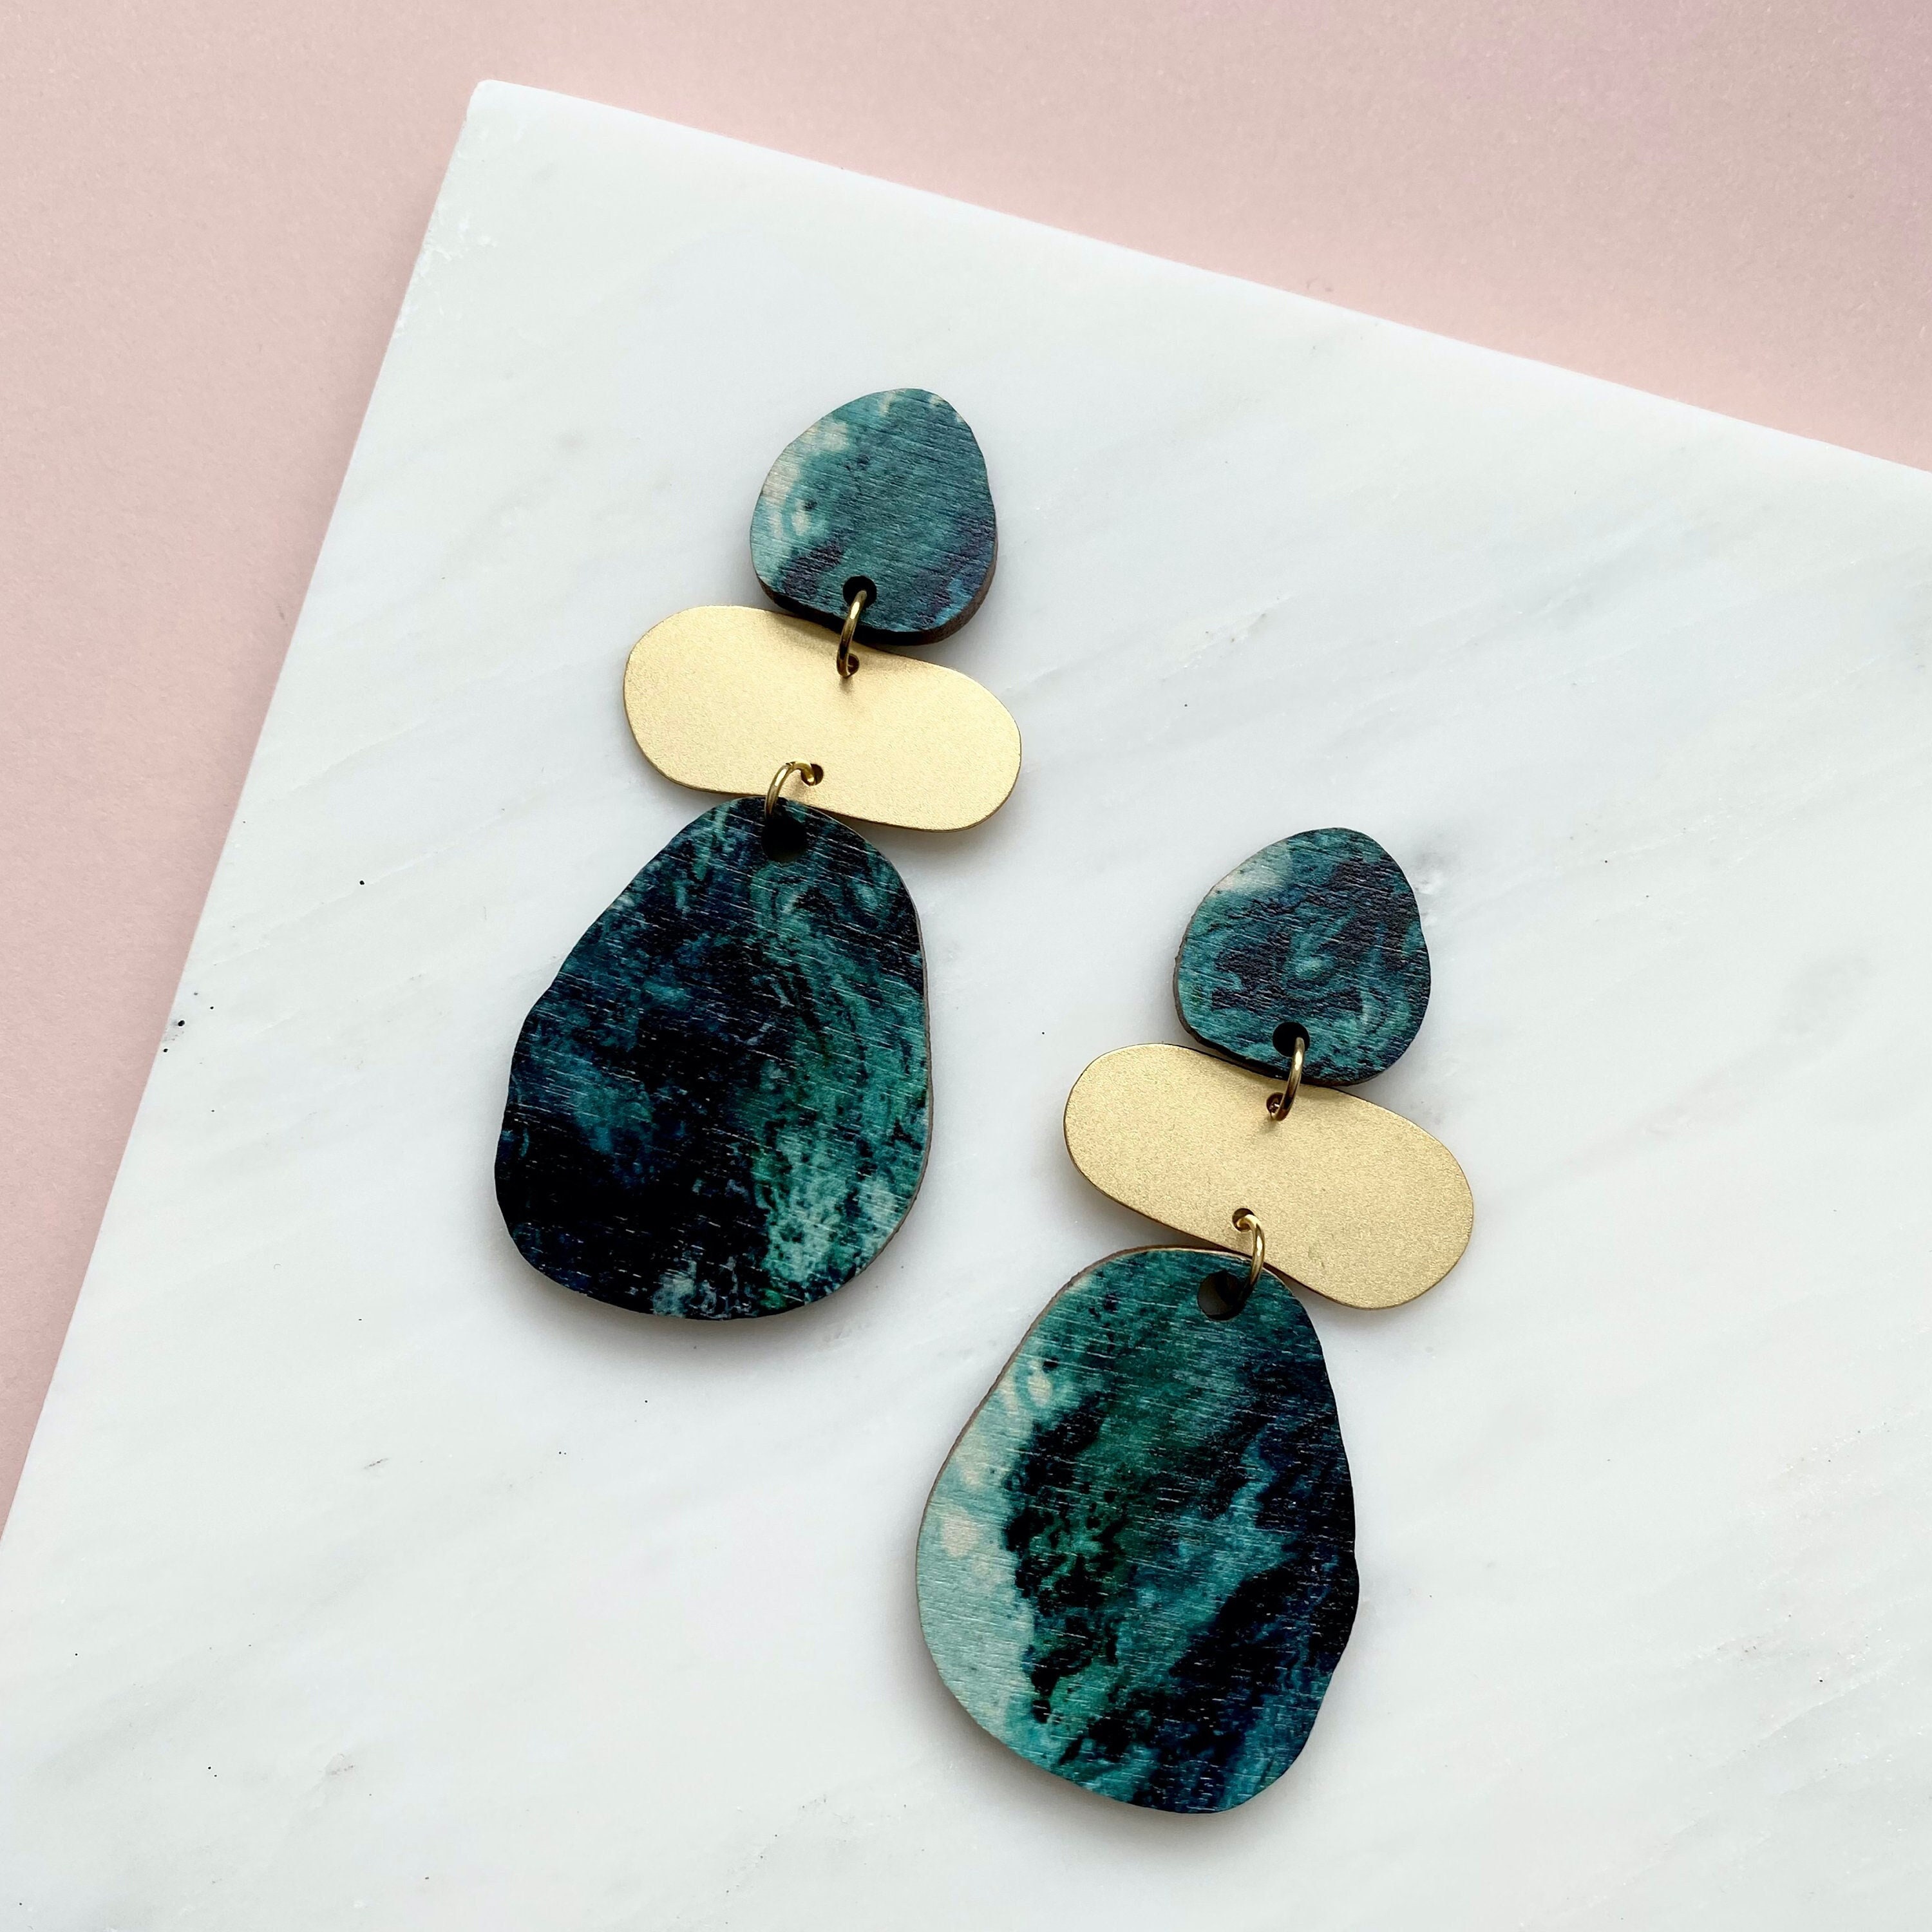 Statement Geometric Drop Earrings - Pebble Studs Gifts For Her Party Festive Teal & Gold